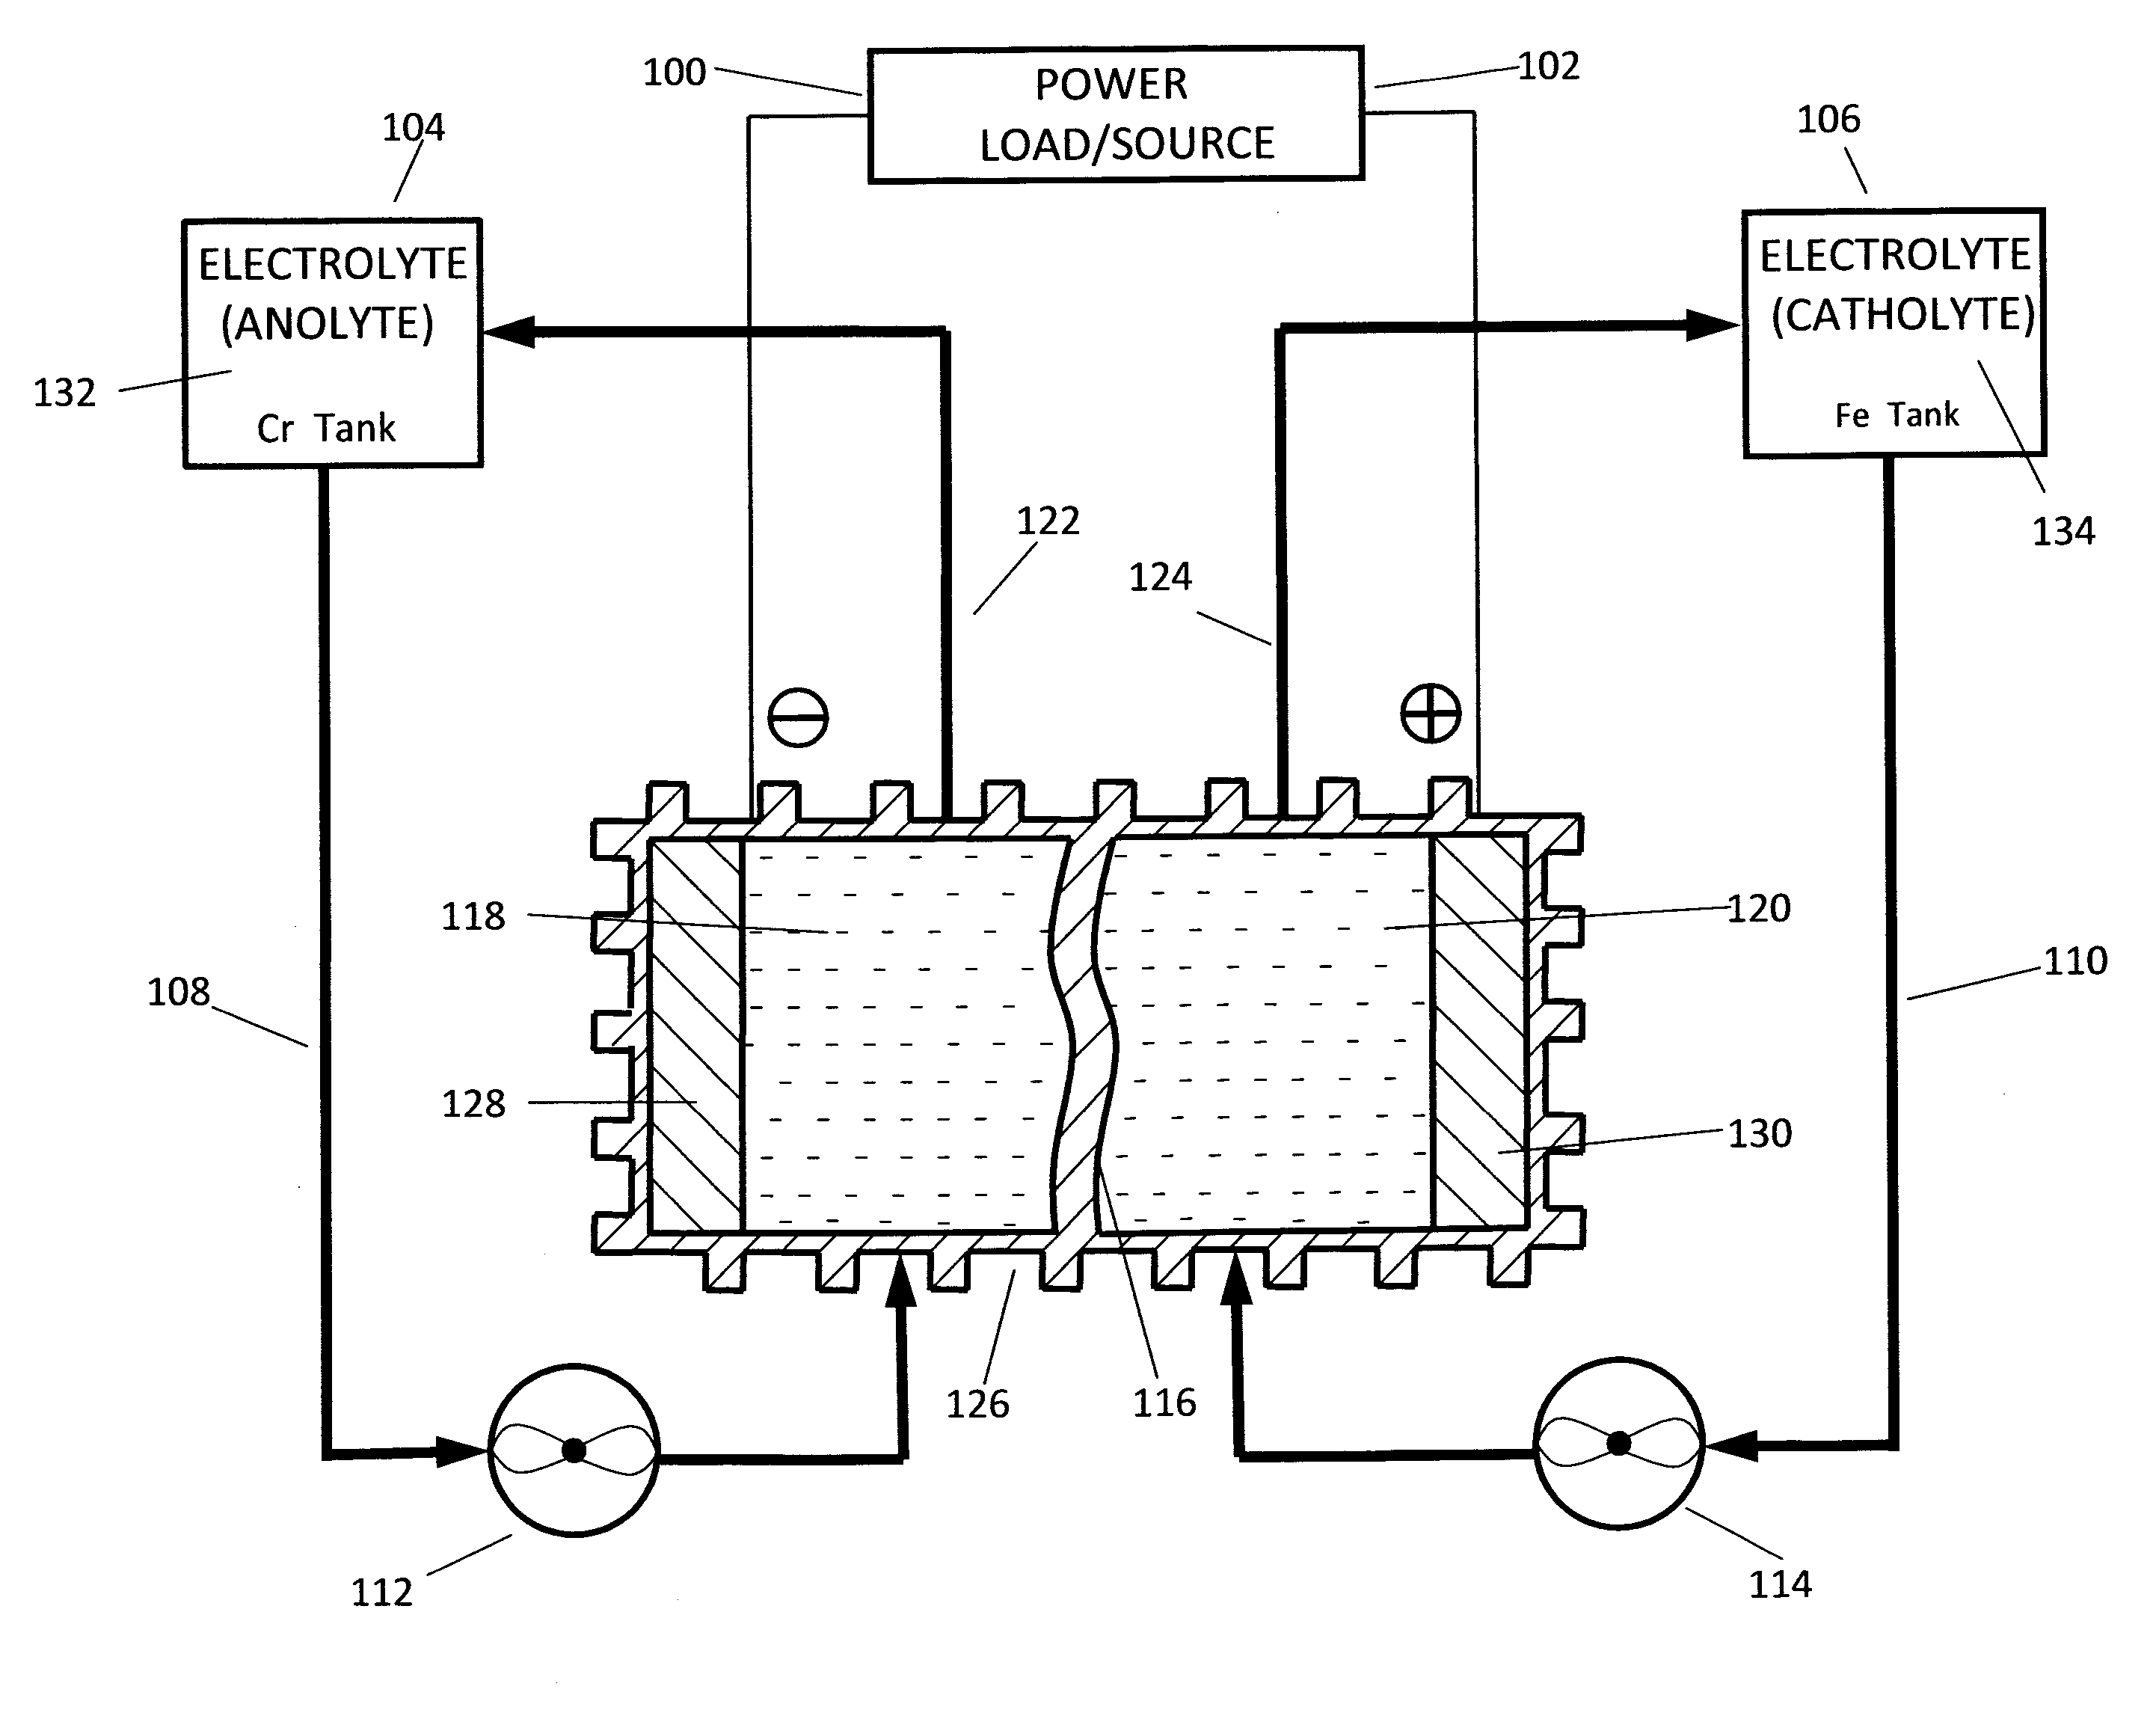 Venturi pumping system in a hydrogen gas circulation of a flow battery